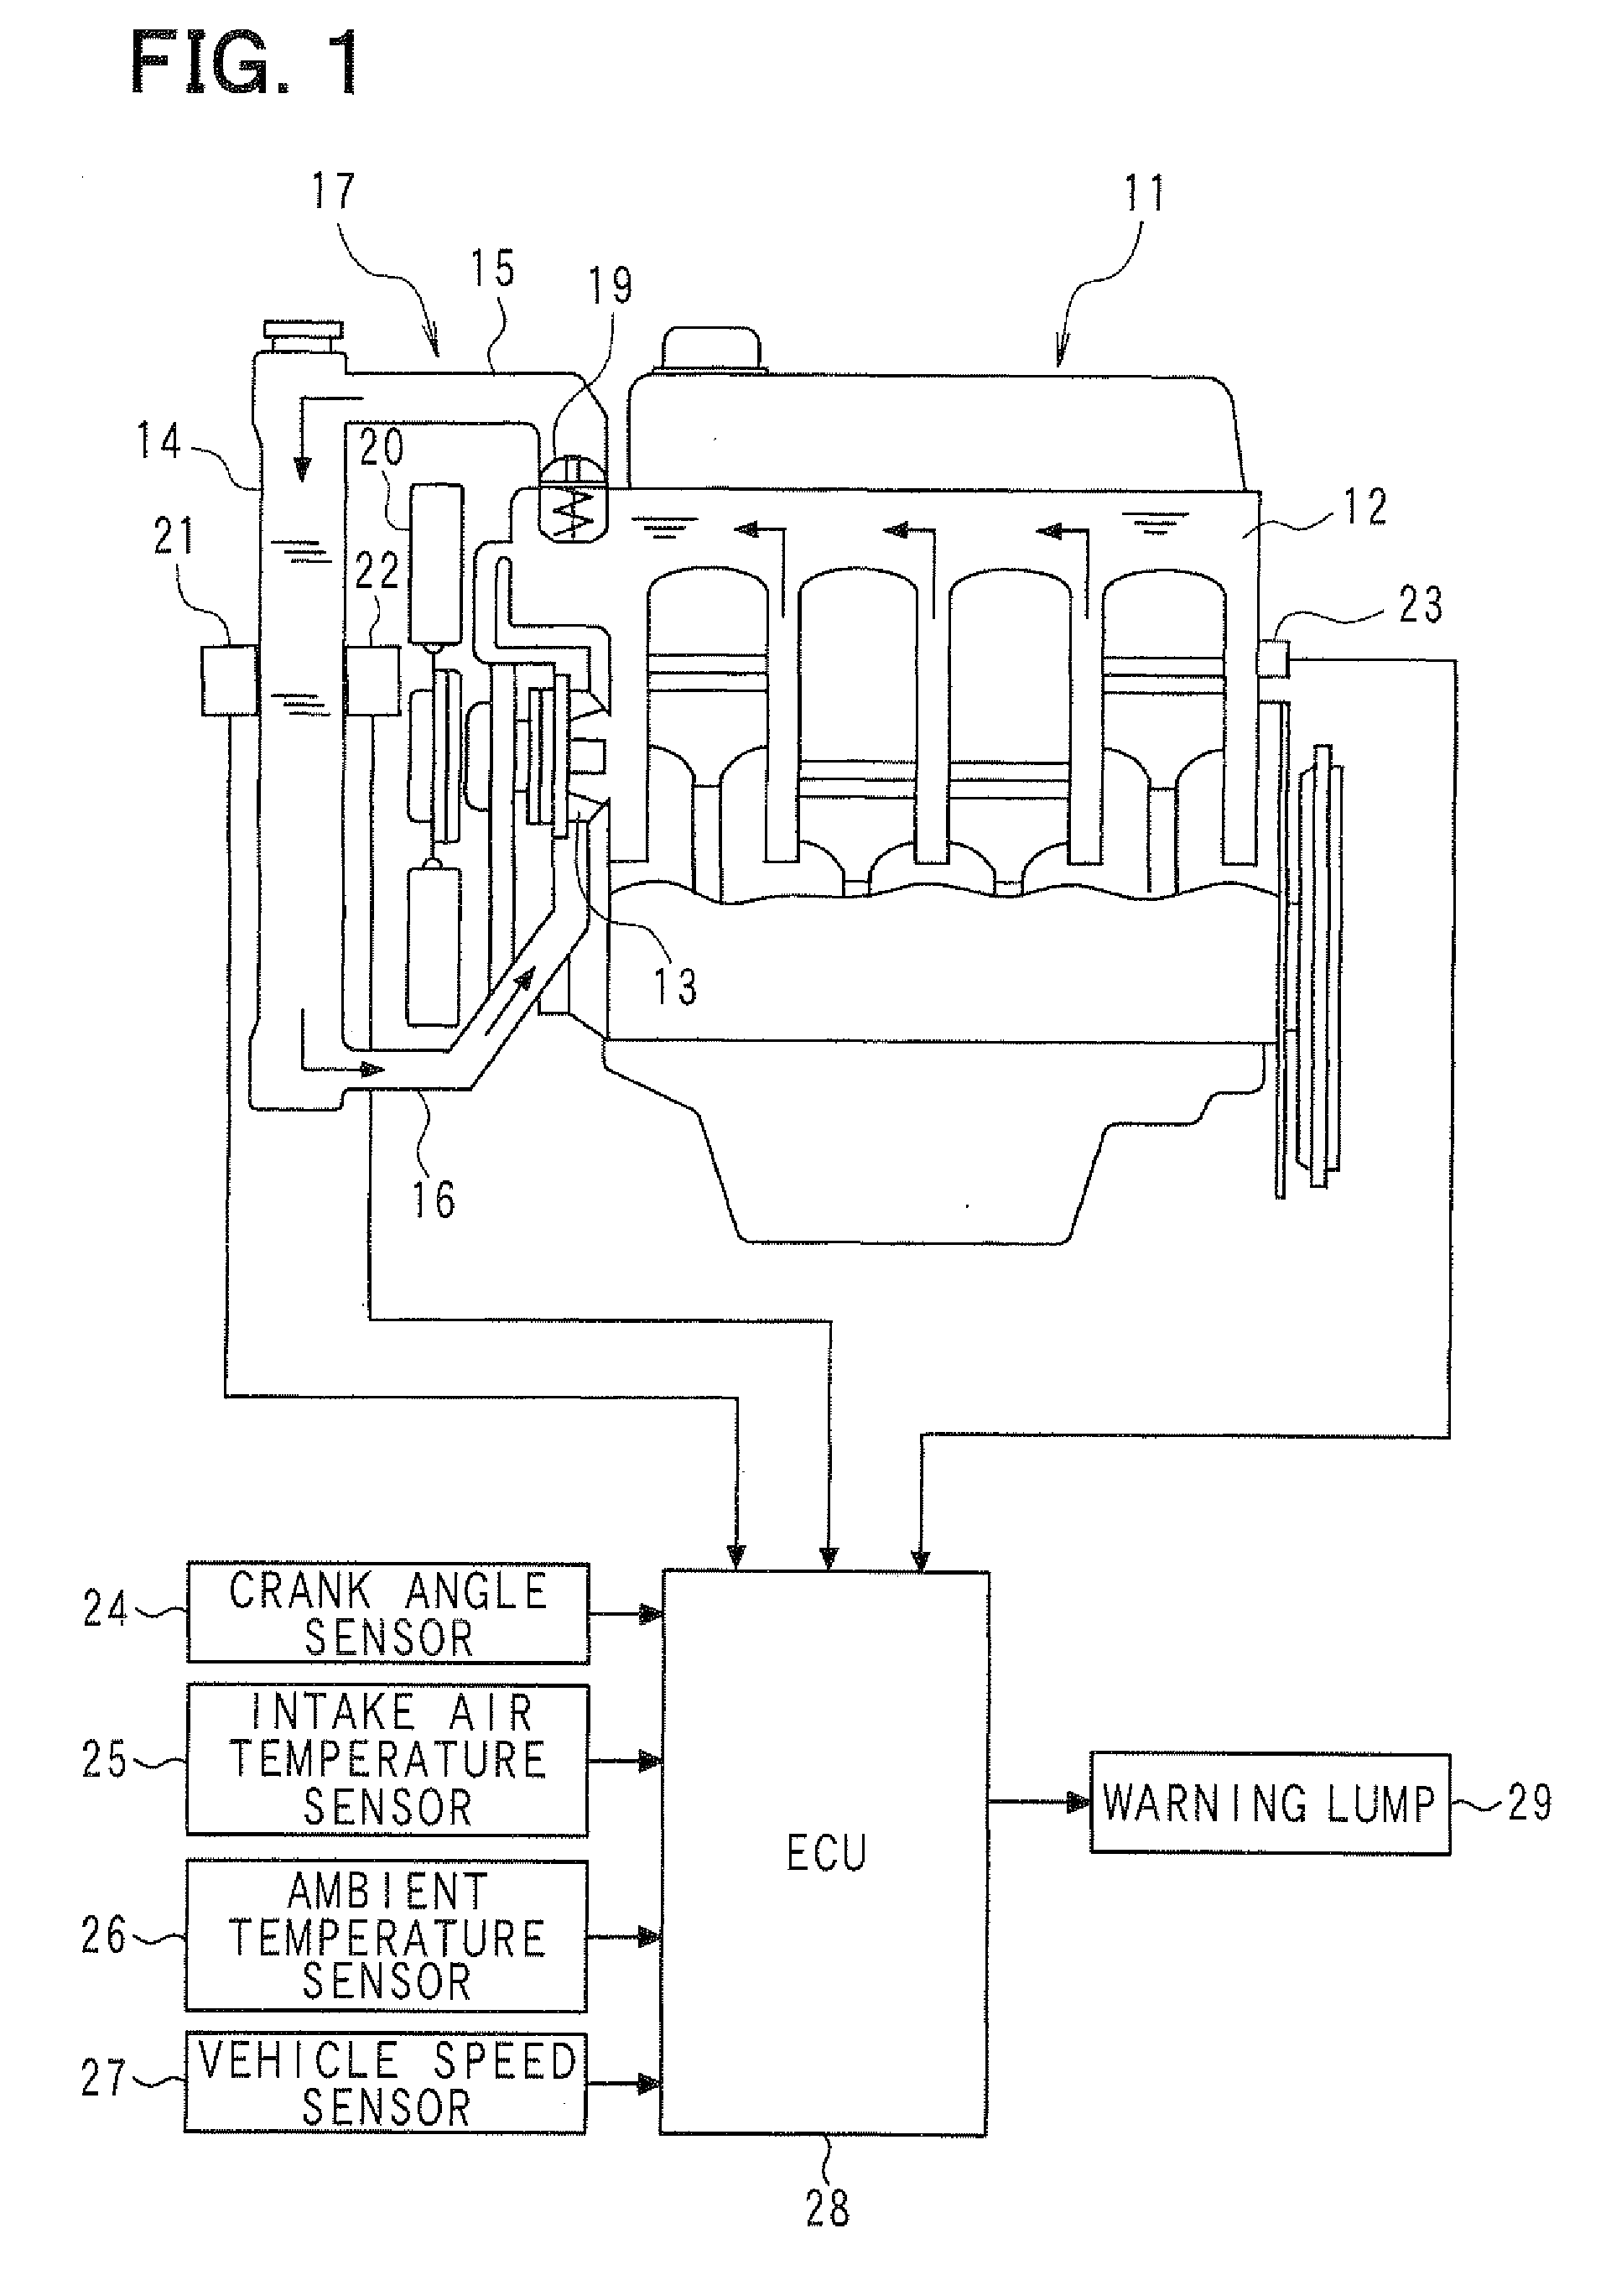 Diagnostic apparatus for vehicle cooling system